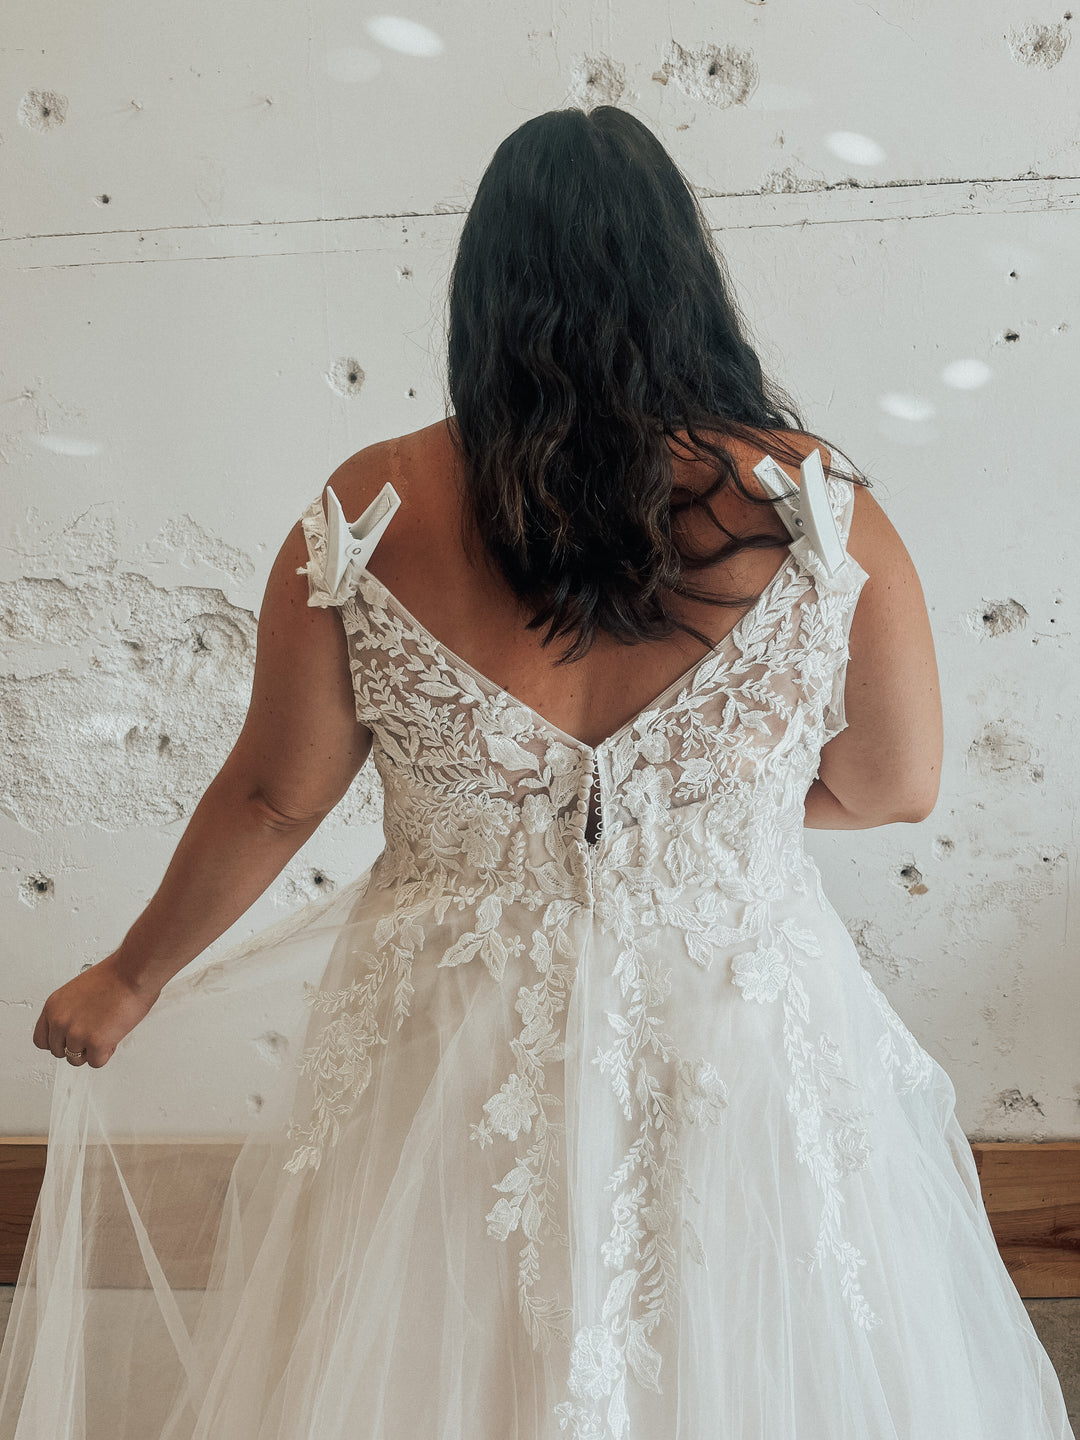 Tag Size 26 | Dearly Loved Bridal